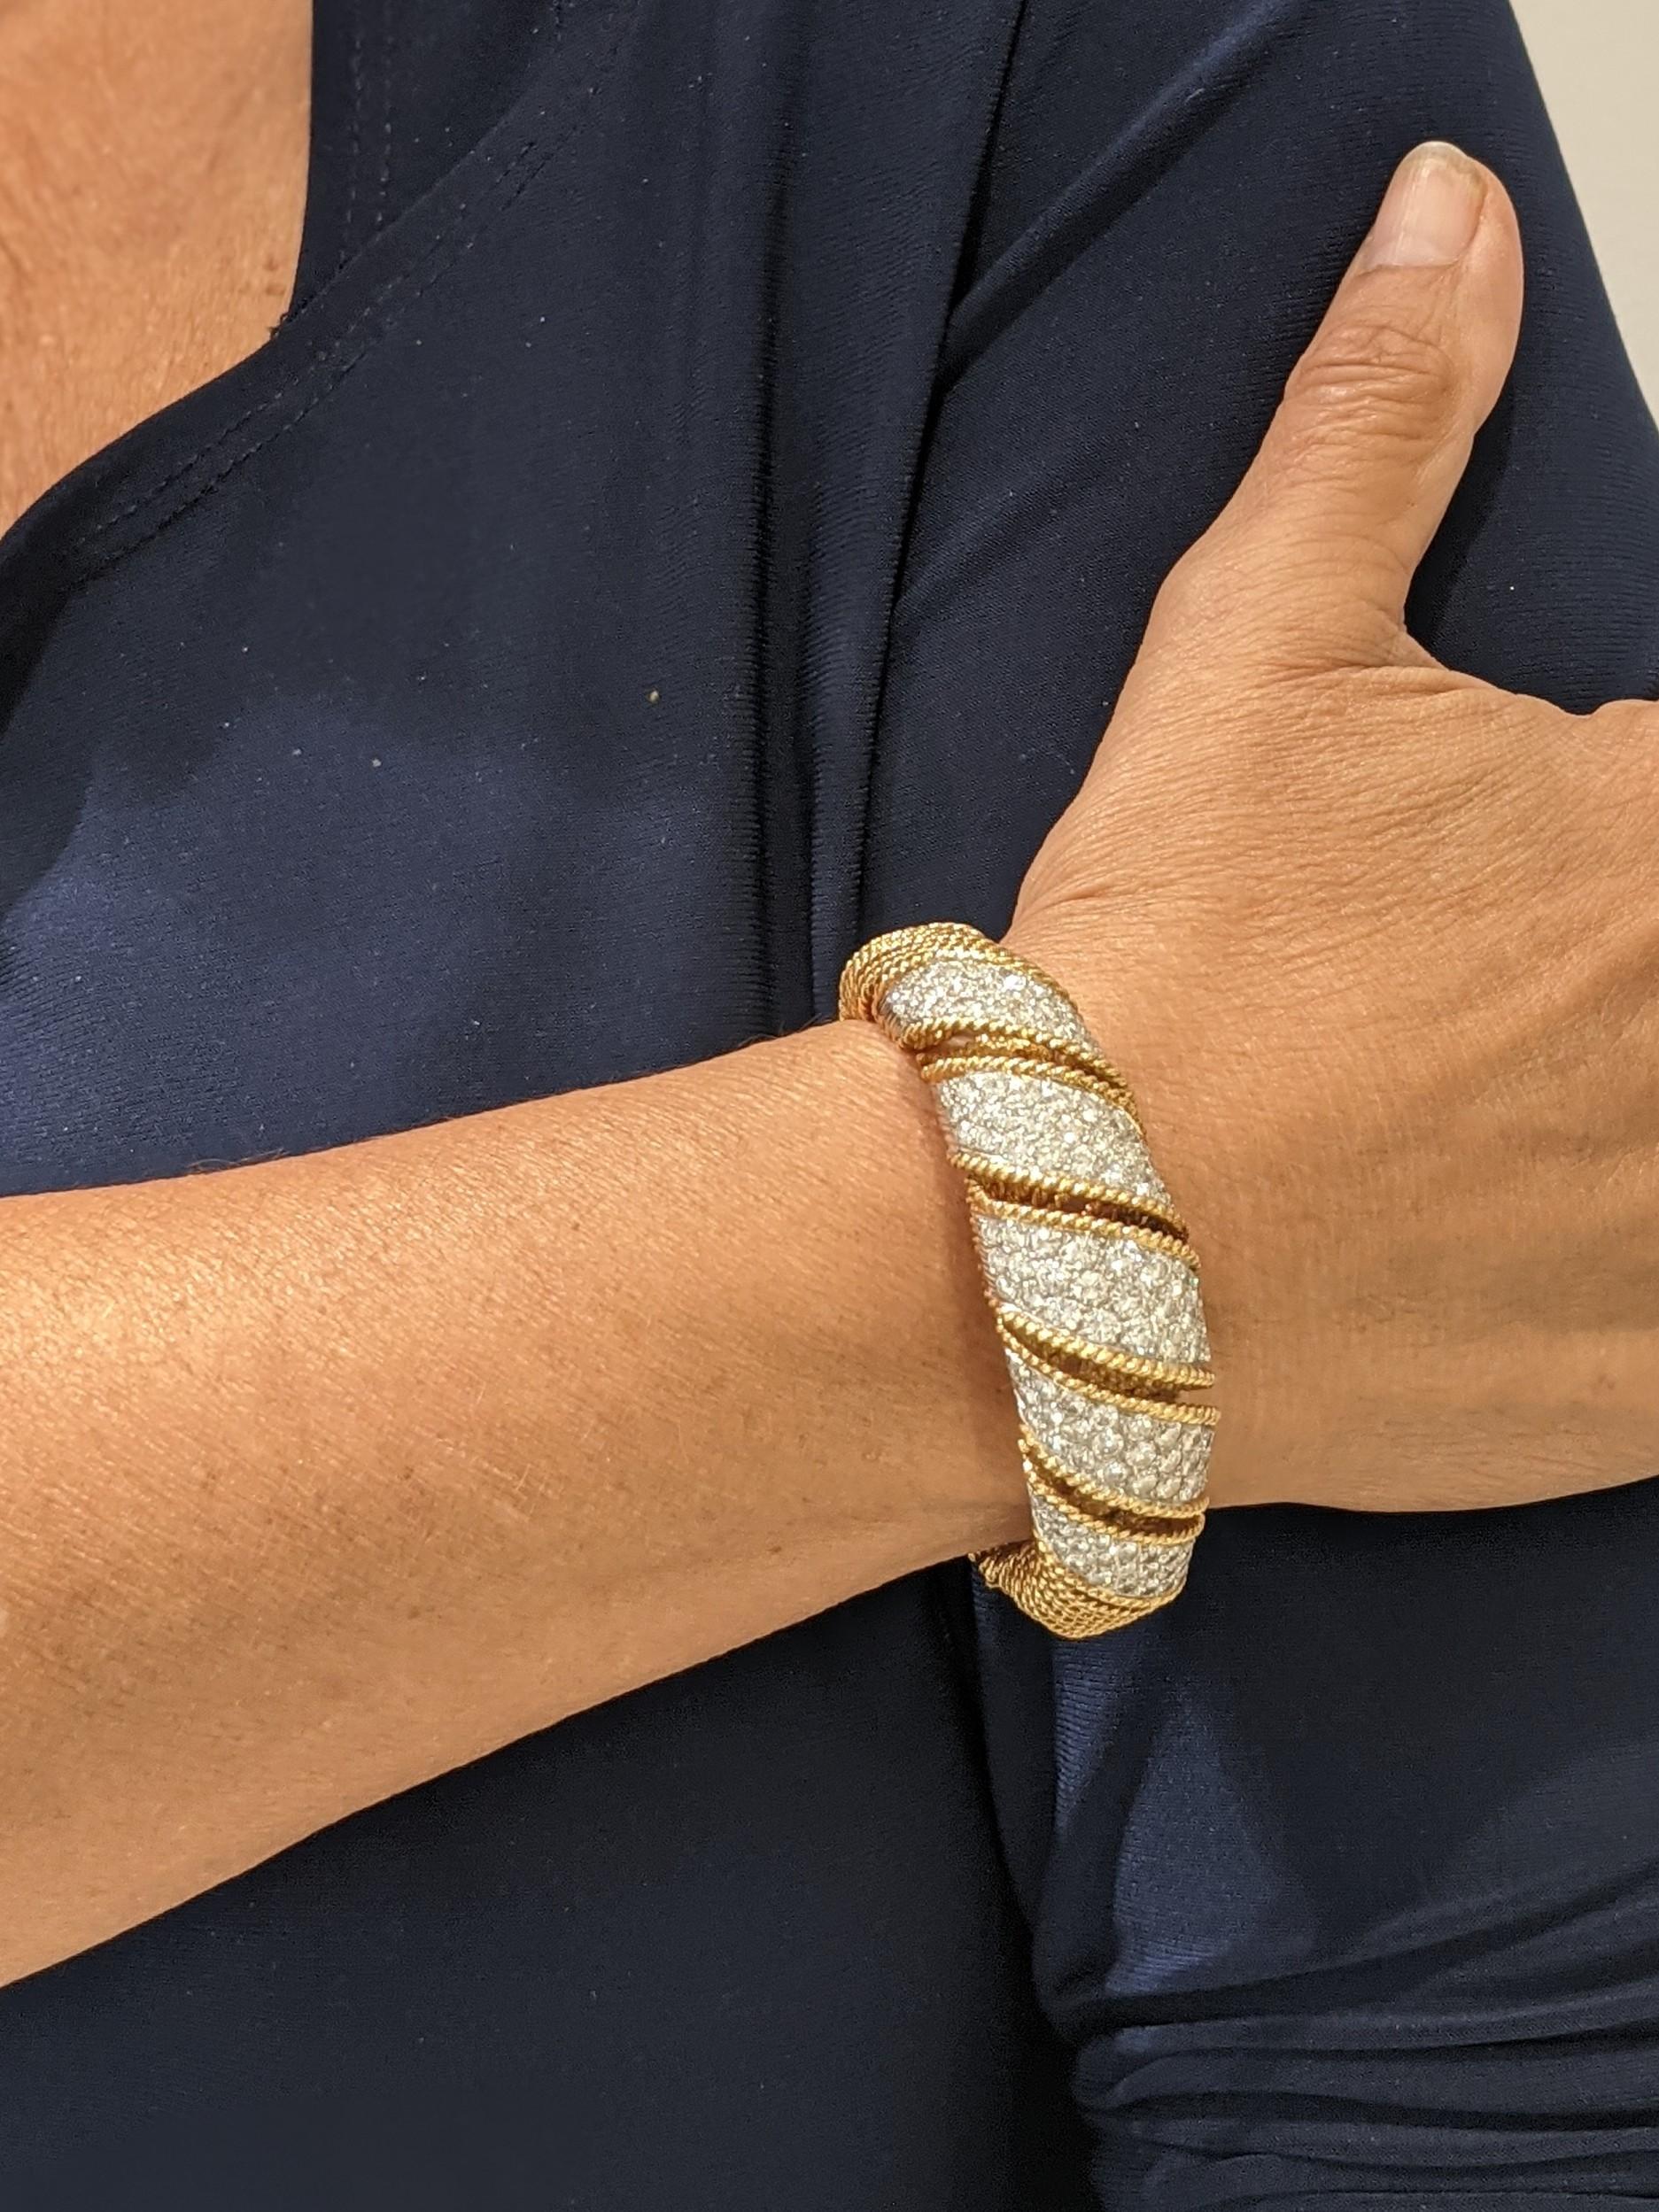 Vintage 18k Yellow gold woven bracelet with 8.85 carats of diamond and 66.5gram. The bracelet has 141 round diamonds weighing approximately 8.85 carats with a color of G/H and a clarity of VS2. The bracelet measures a 6. The clasp is an open box